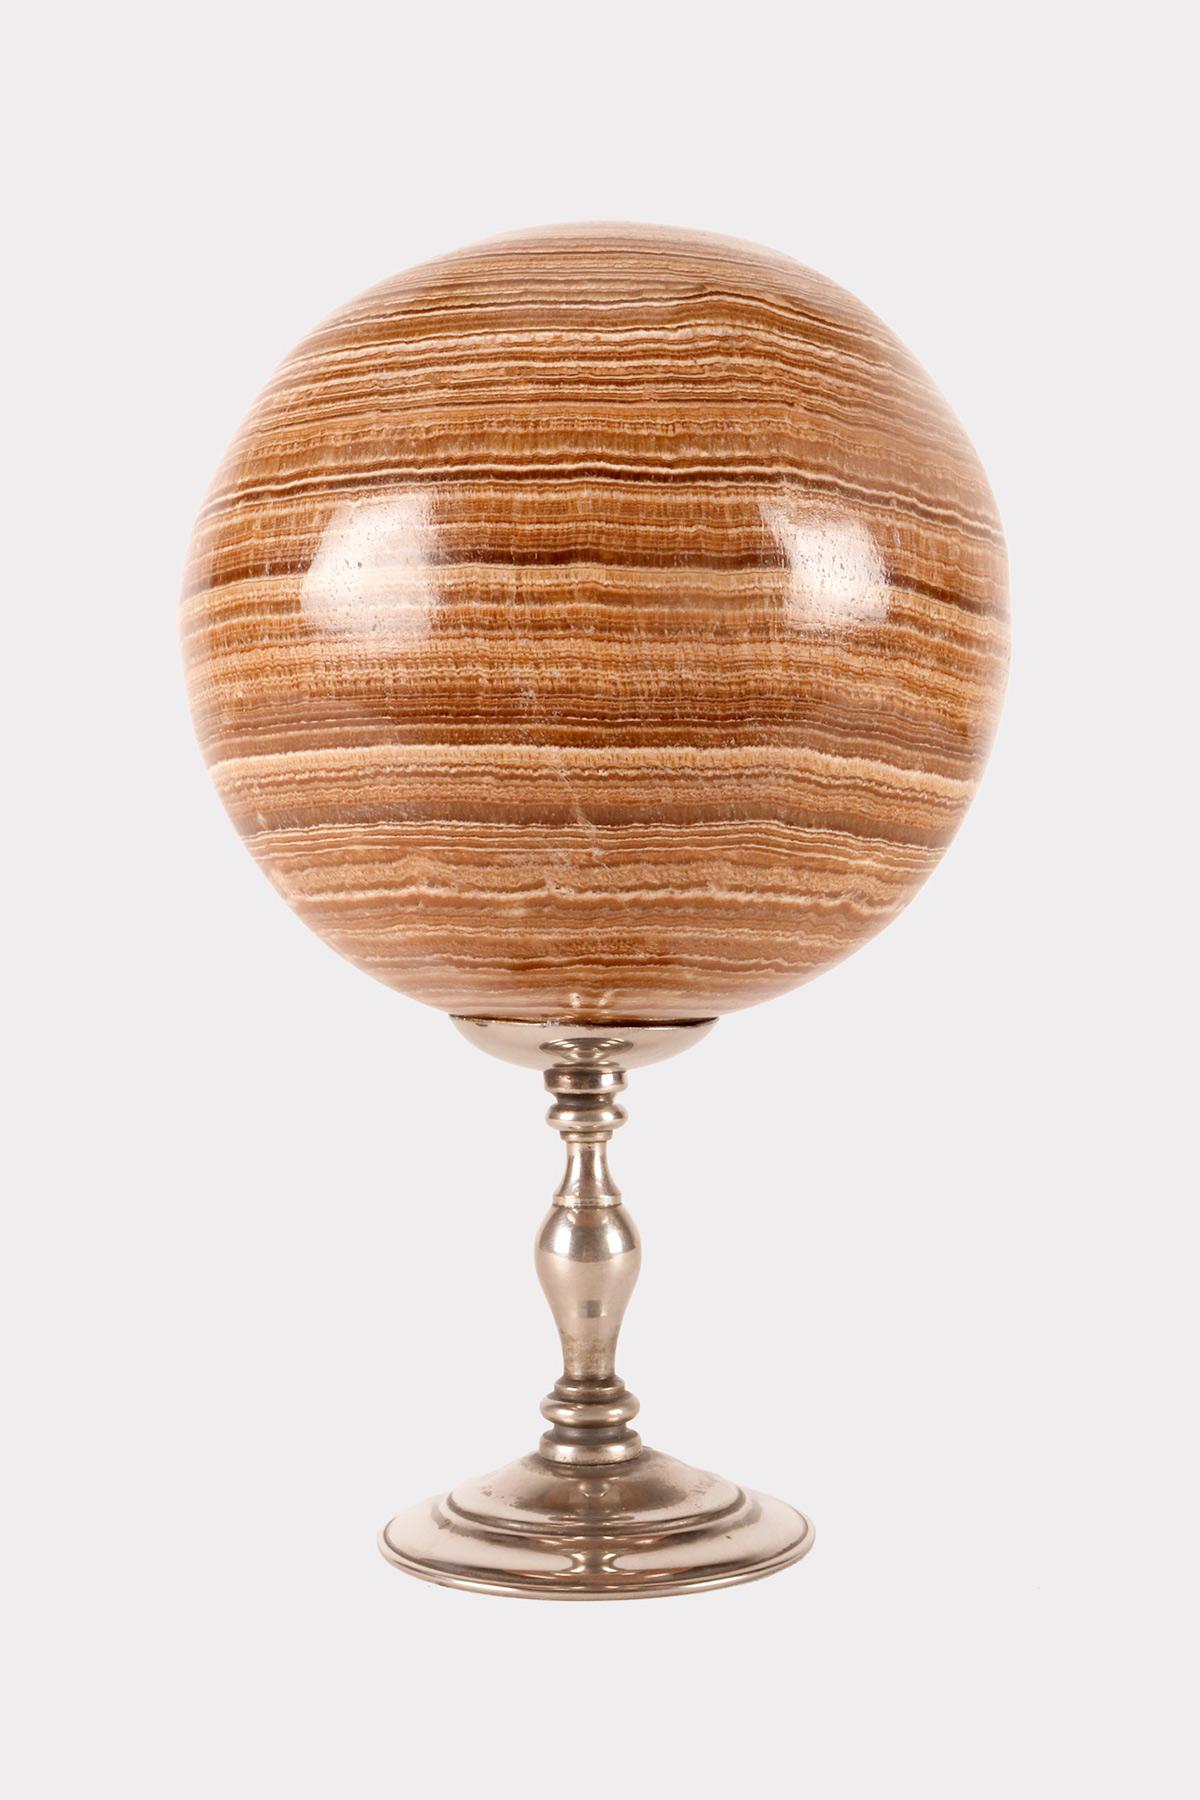 A large sphere of Aragonite stone, resting on a base, made of silver which has a cup-shaped stand with a wavy profile that opens upwards with a concave surface. Italy circa 1870.